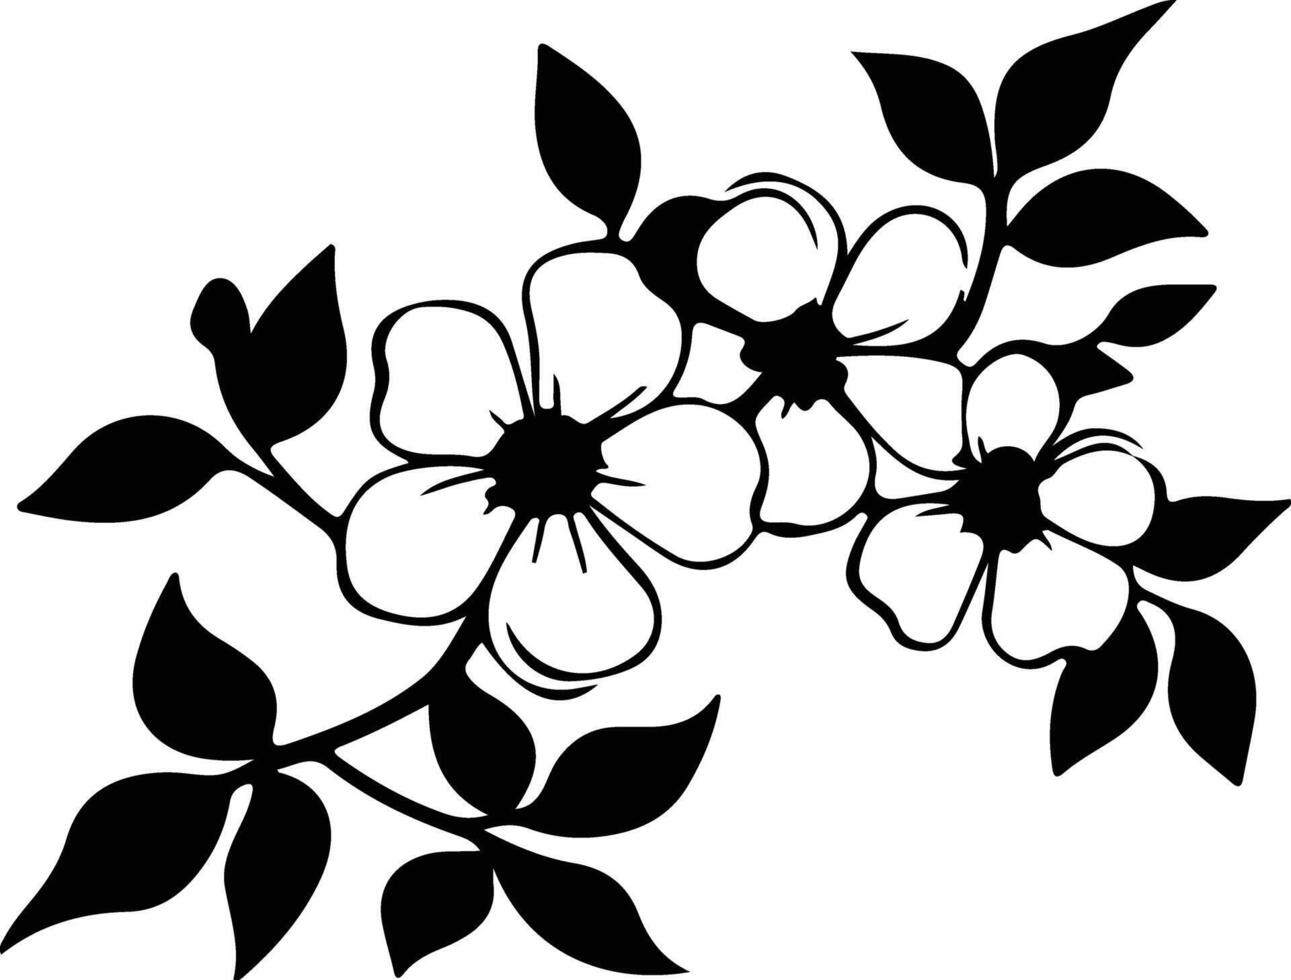 AI generated dogwood black silhouette vector